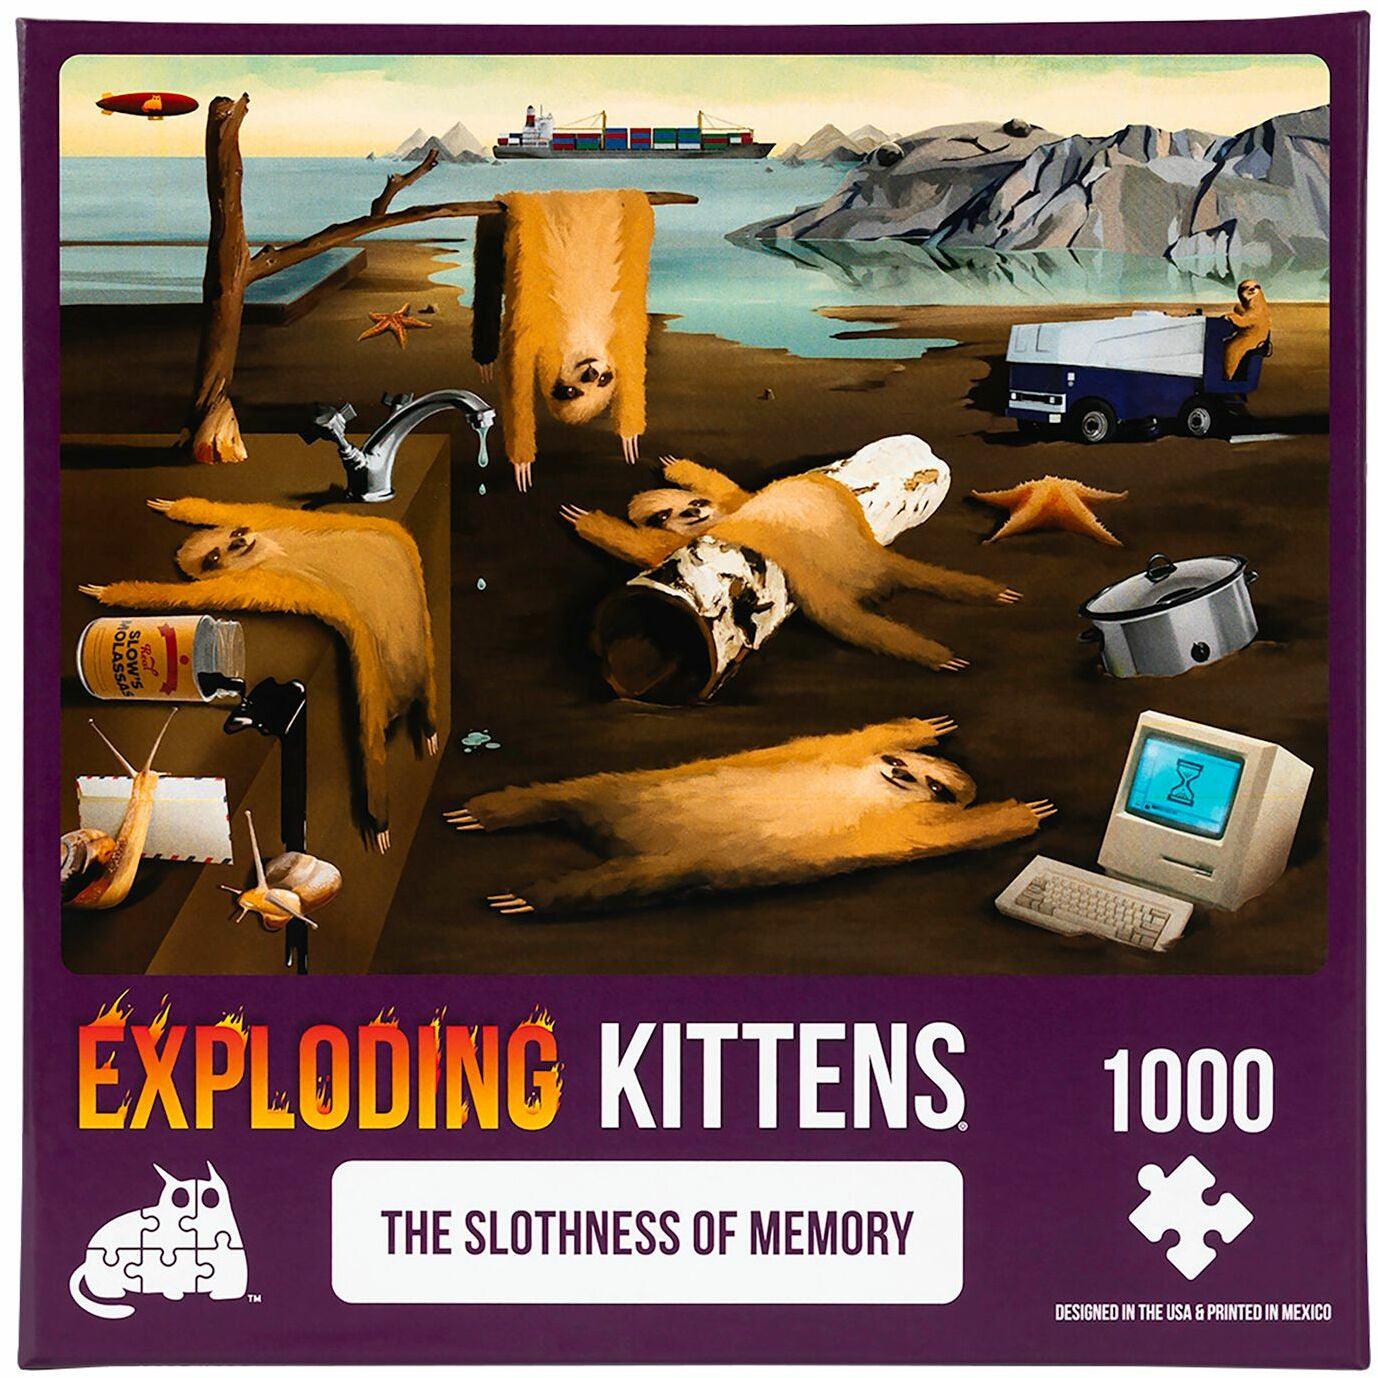 VR-101452 Exploding Kittens Puzzle Slothness of Memory 1,000 pieces - Exploding Kittens - Titan Pop Culture